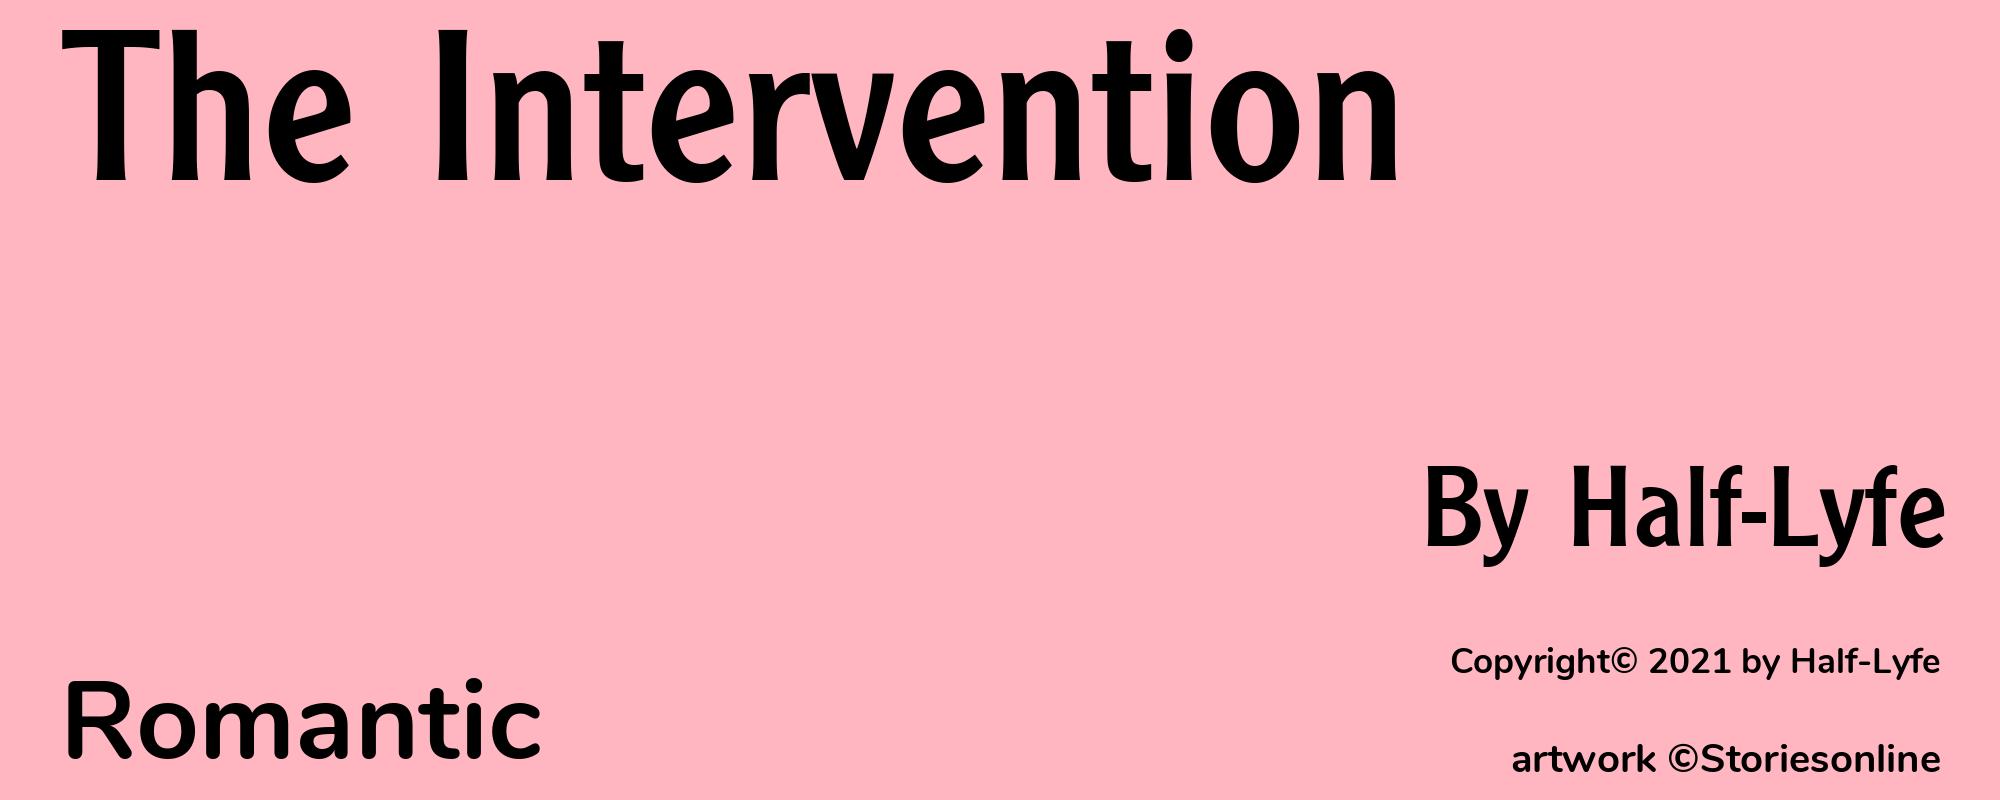 The Intervention - Cover